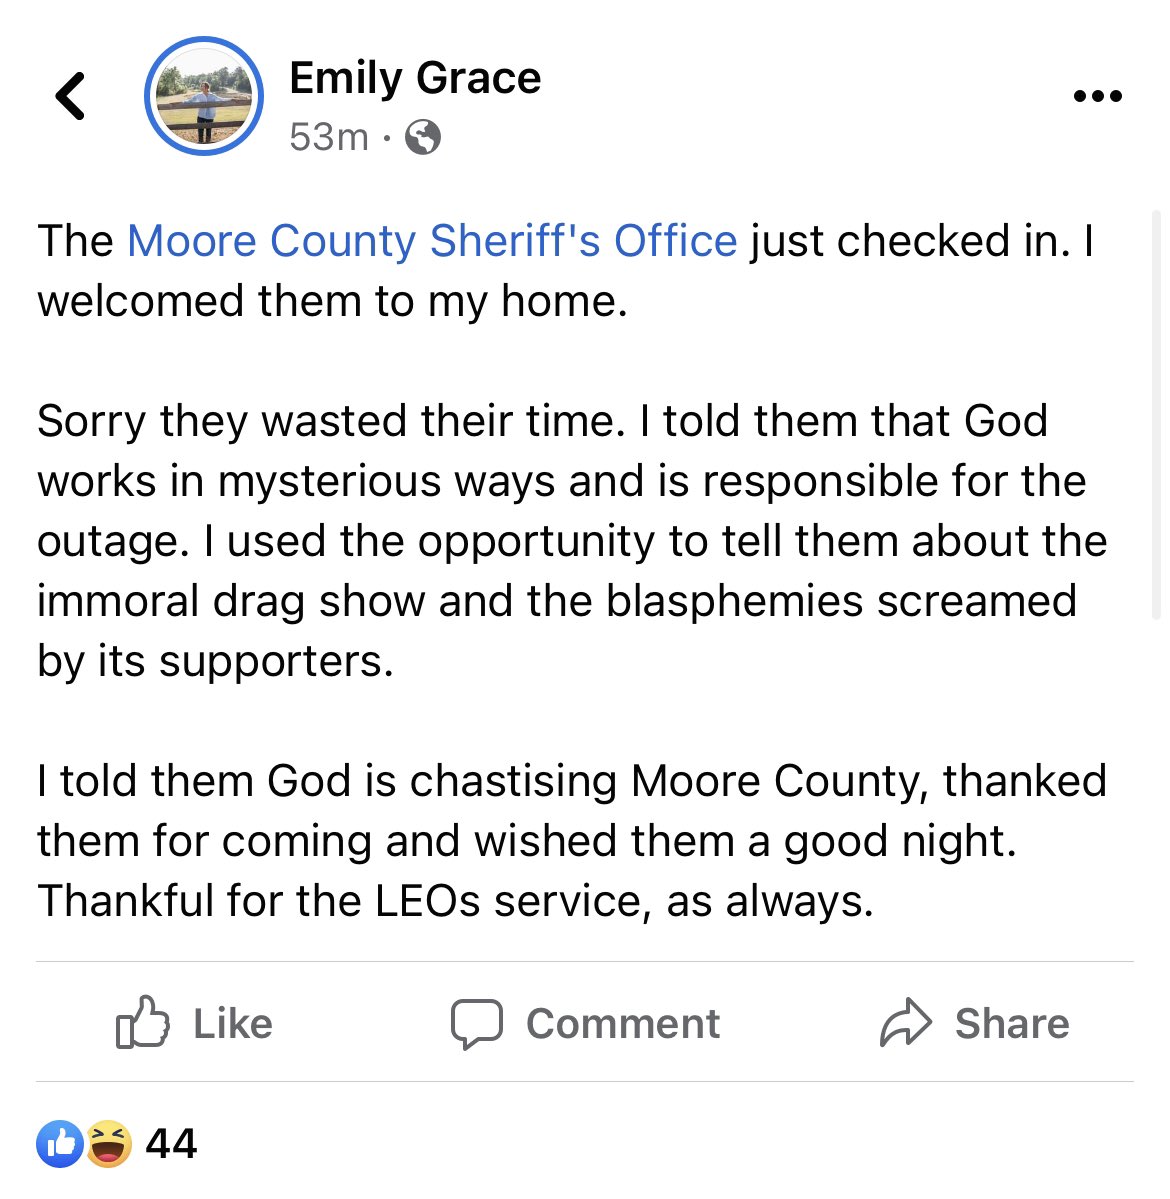 Here’s Rainey’s update on being visited by the Moore County Sheriff’s Office after her post referencing the attack.